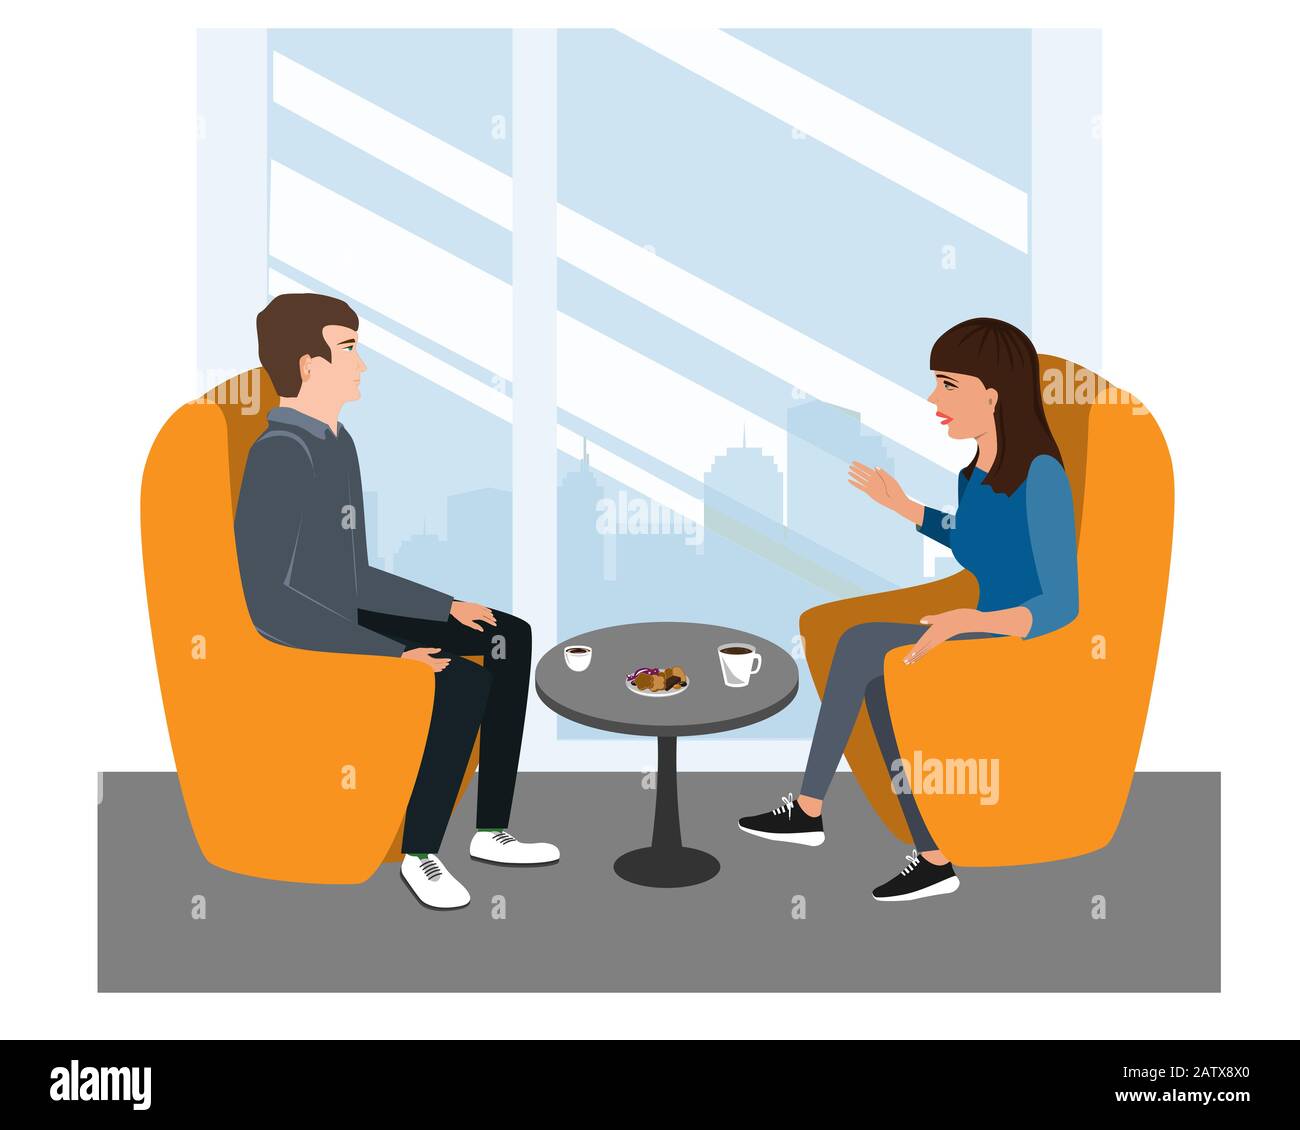 Woman and Man are seating in chairs and discussing some topic. Friends or Businessman And Businesswoman Talk, vector illustration Stock Vector